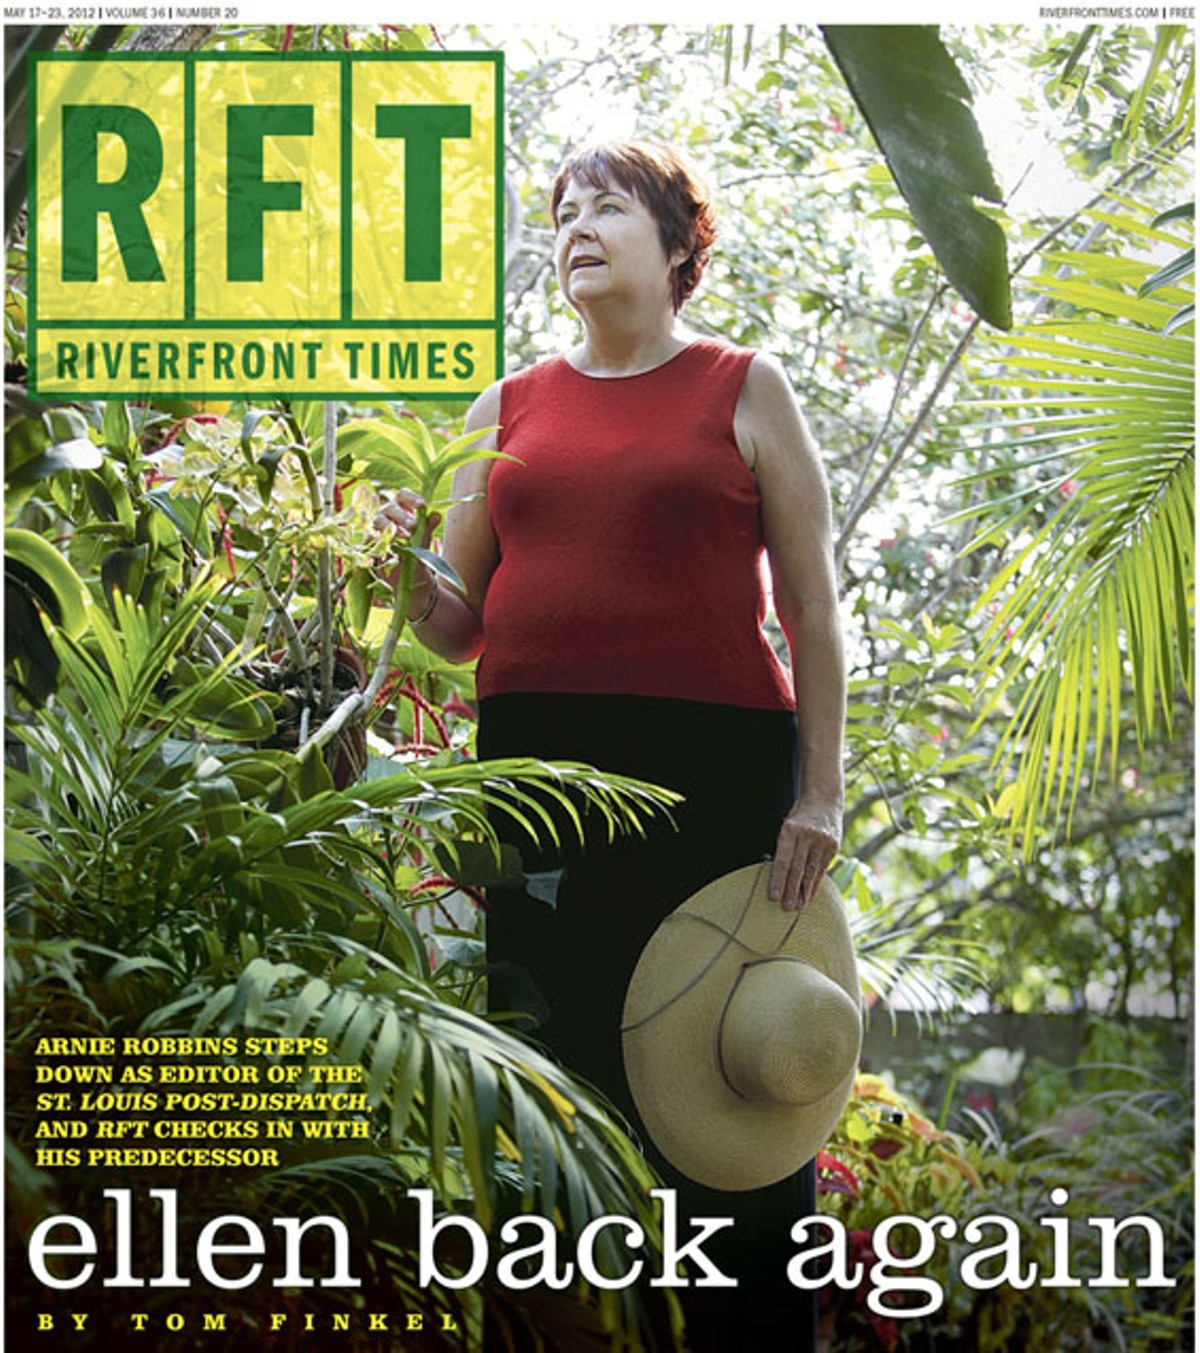 The Cover of the May 17 Print Edition